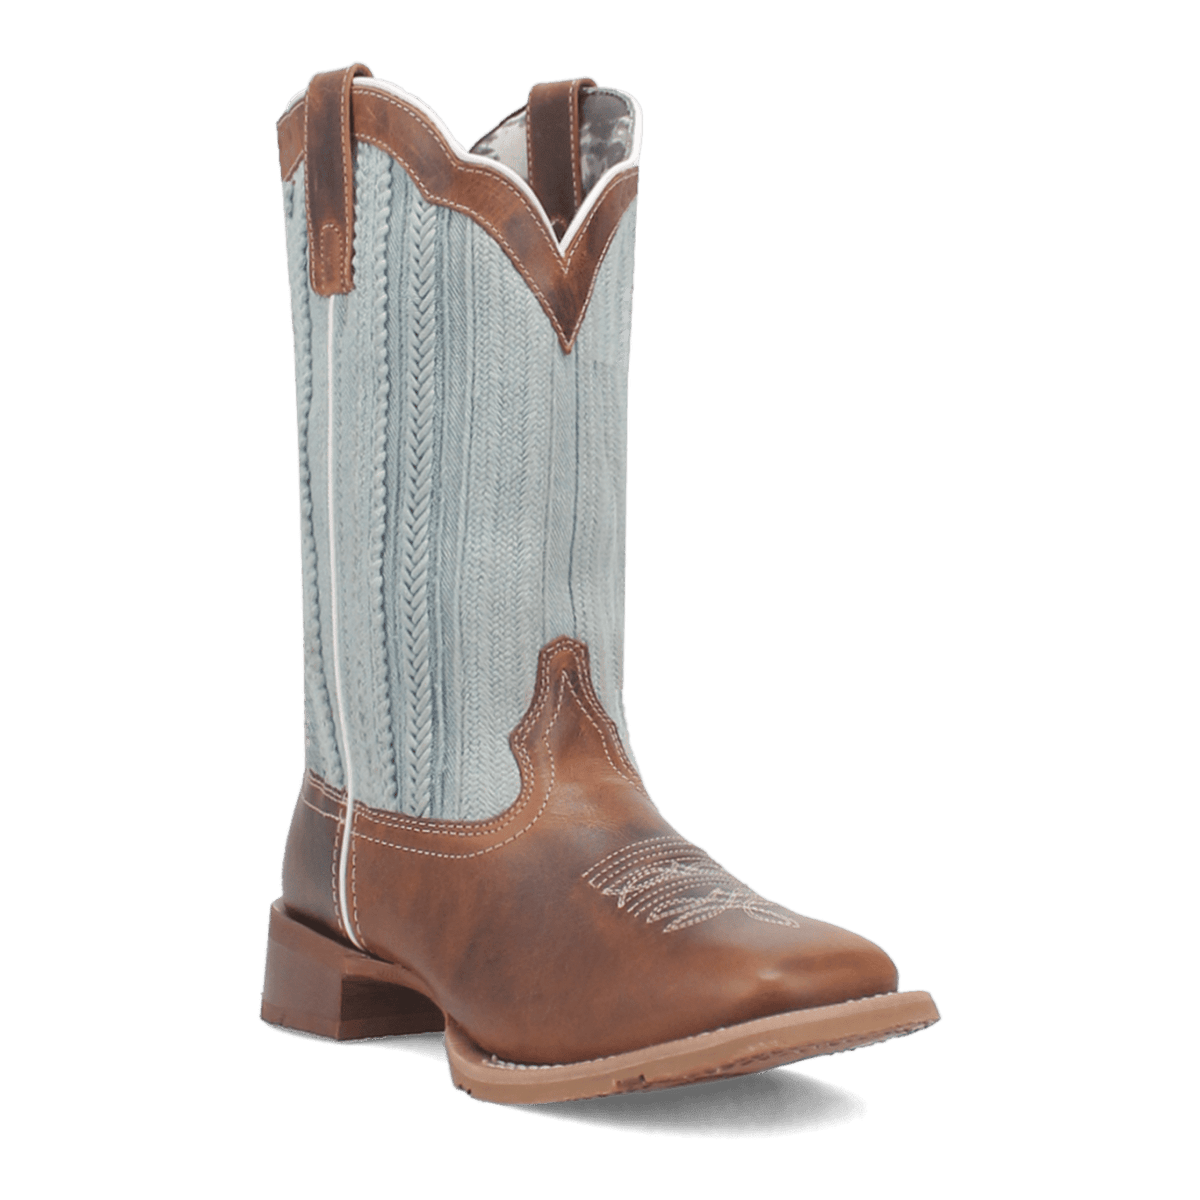 BLUE MOON LEATHER BOOT Cover